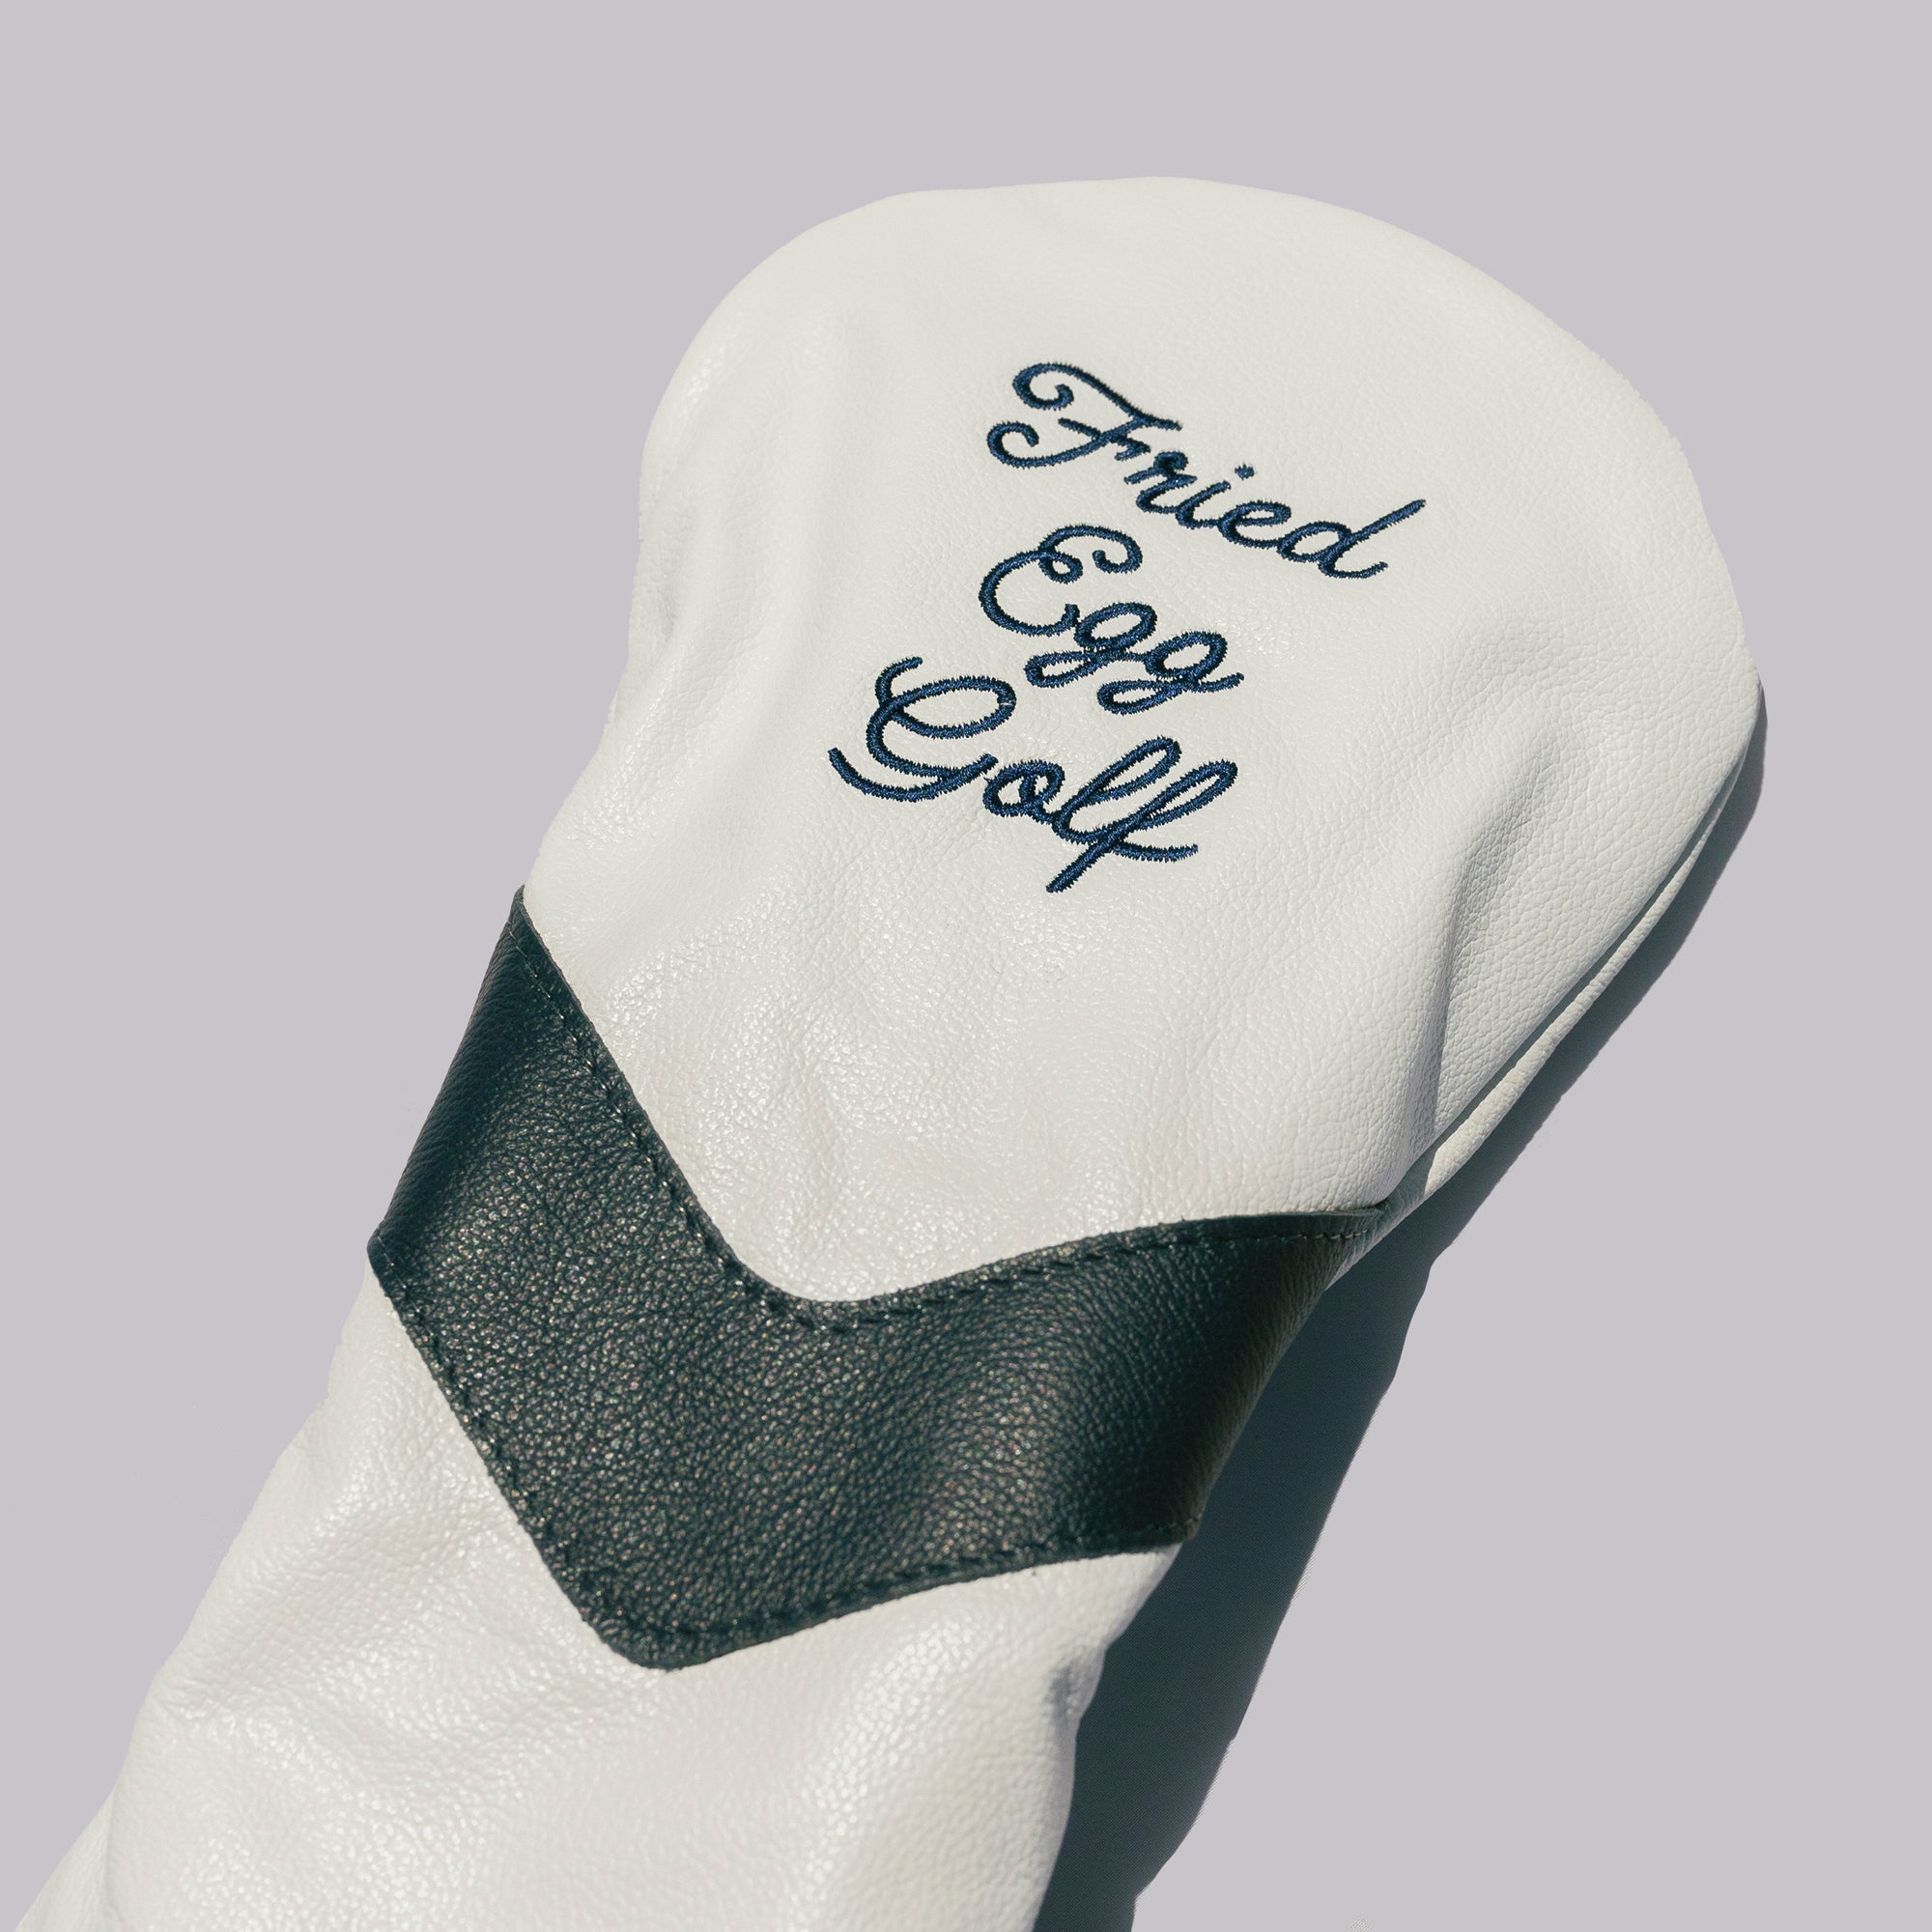 Fried Egg Golf White Leather Headcover - Driver